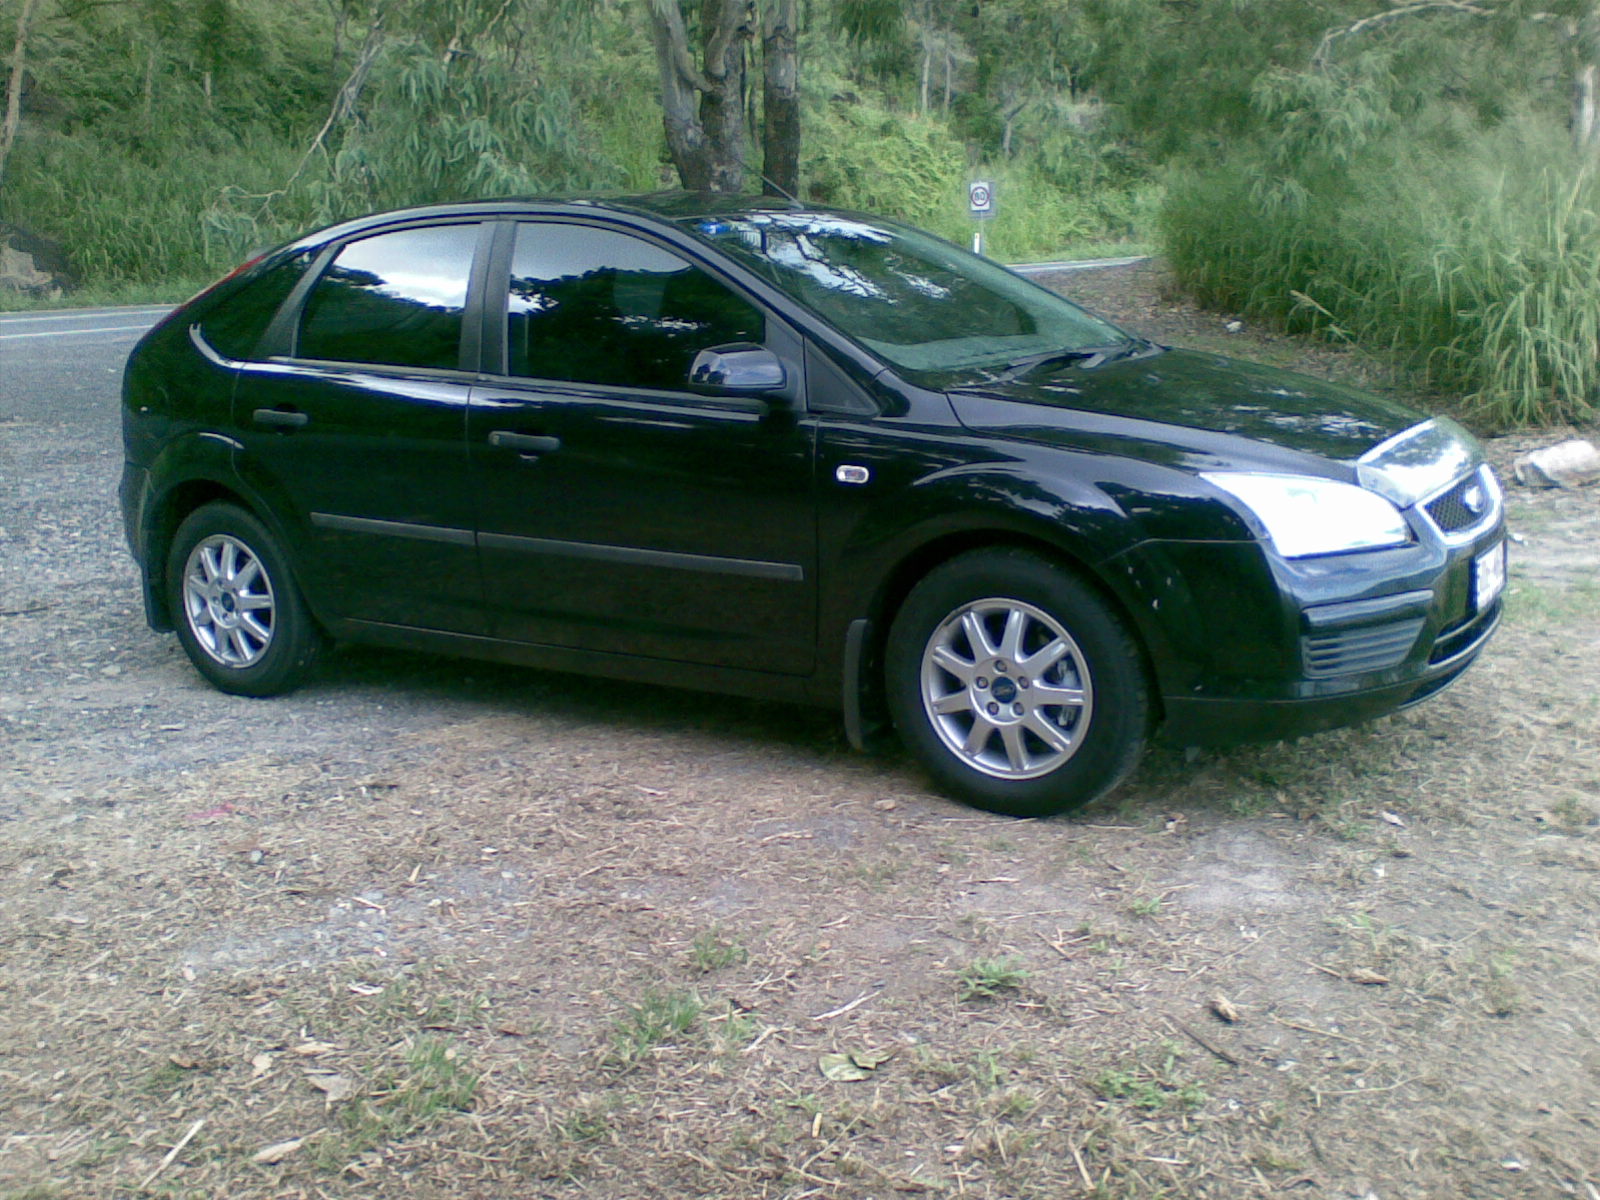 2007 Ford focus zx5 specs #2